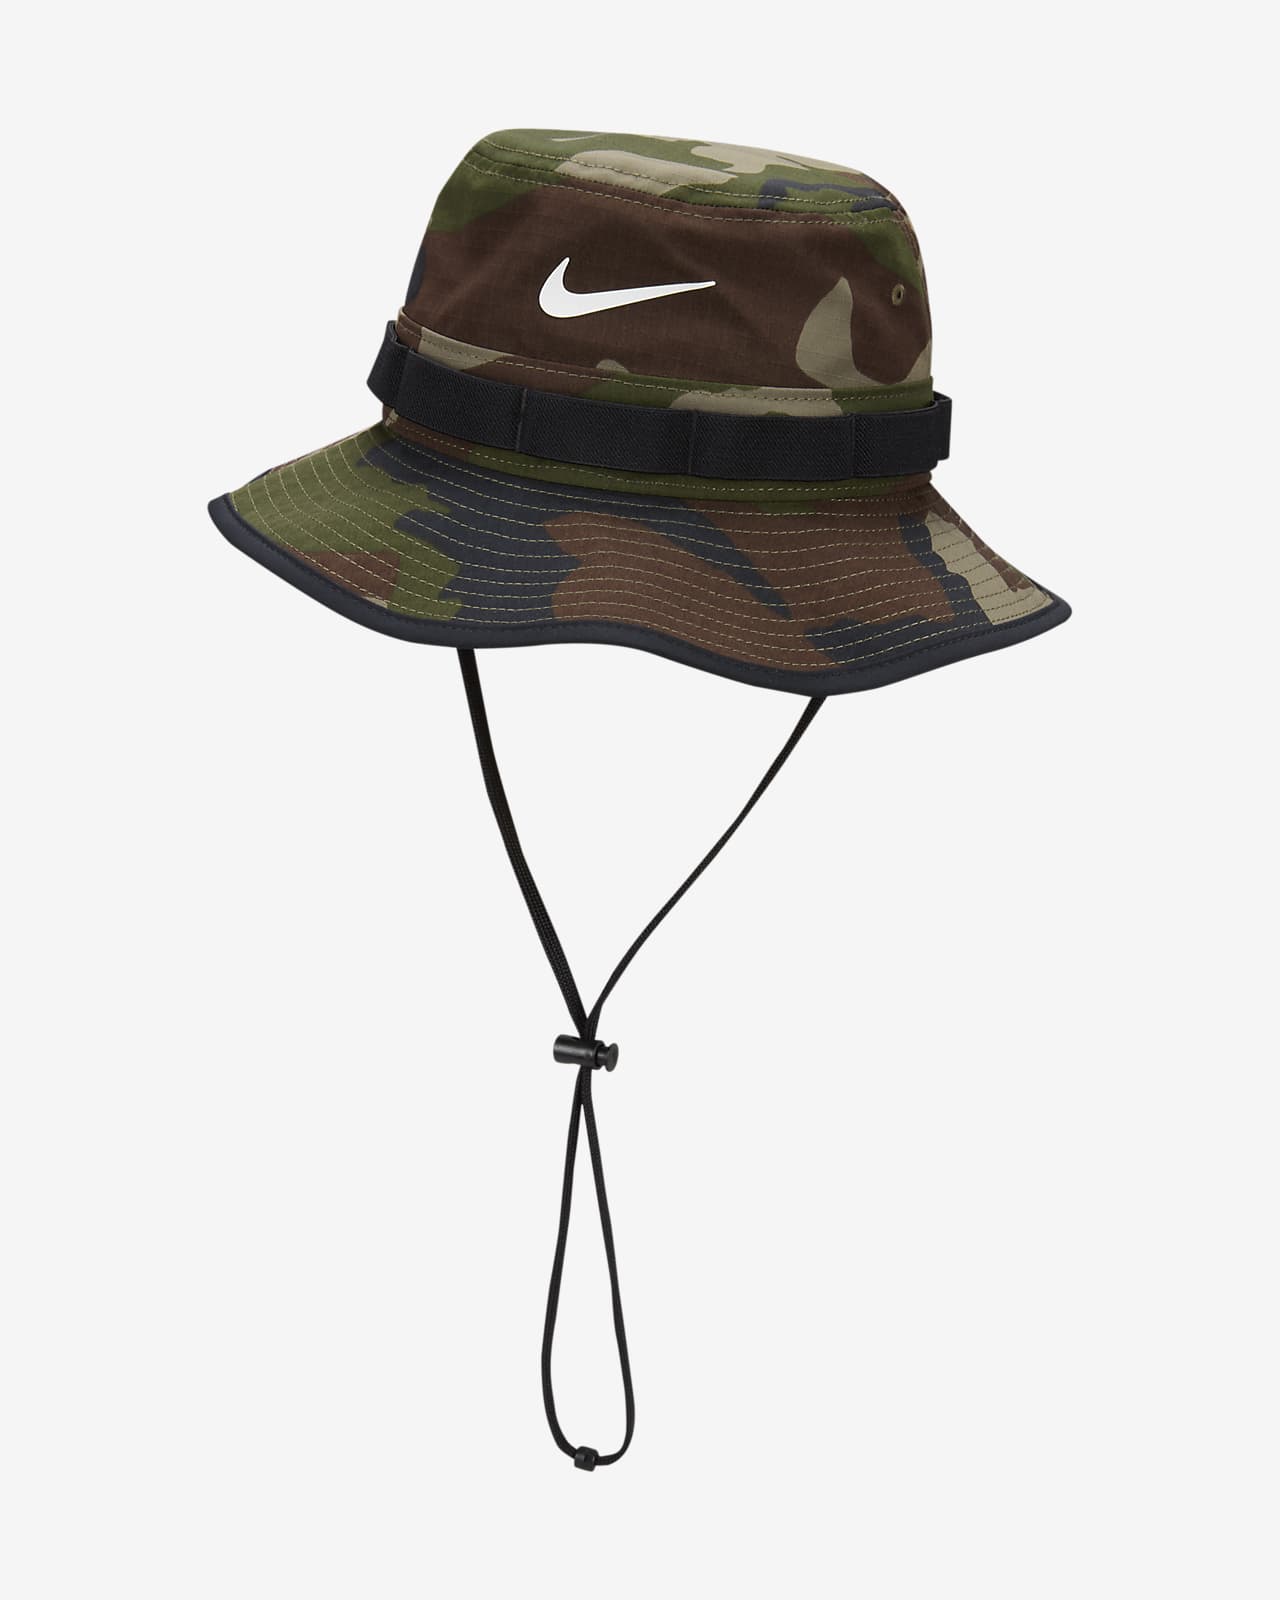 https://static.nike.com/a/images/t_PDP_1280_v1/f_auto,q_auto:eco/0f87adde-6366-49e3-9ab8-3ee6a7ecd64d/dri-fit-apex-camo-print-bucket-hat-ZGZxgR.png